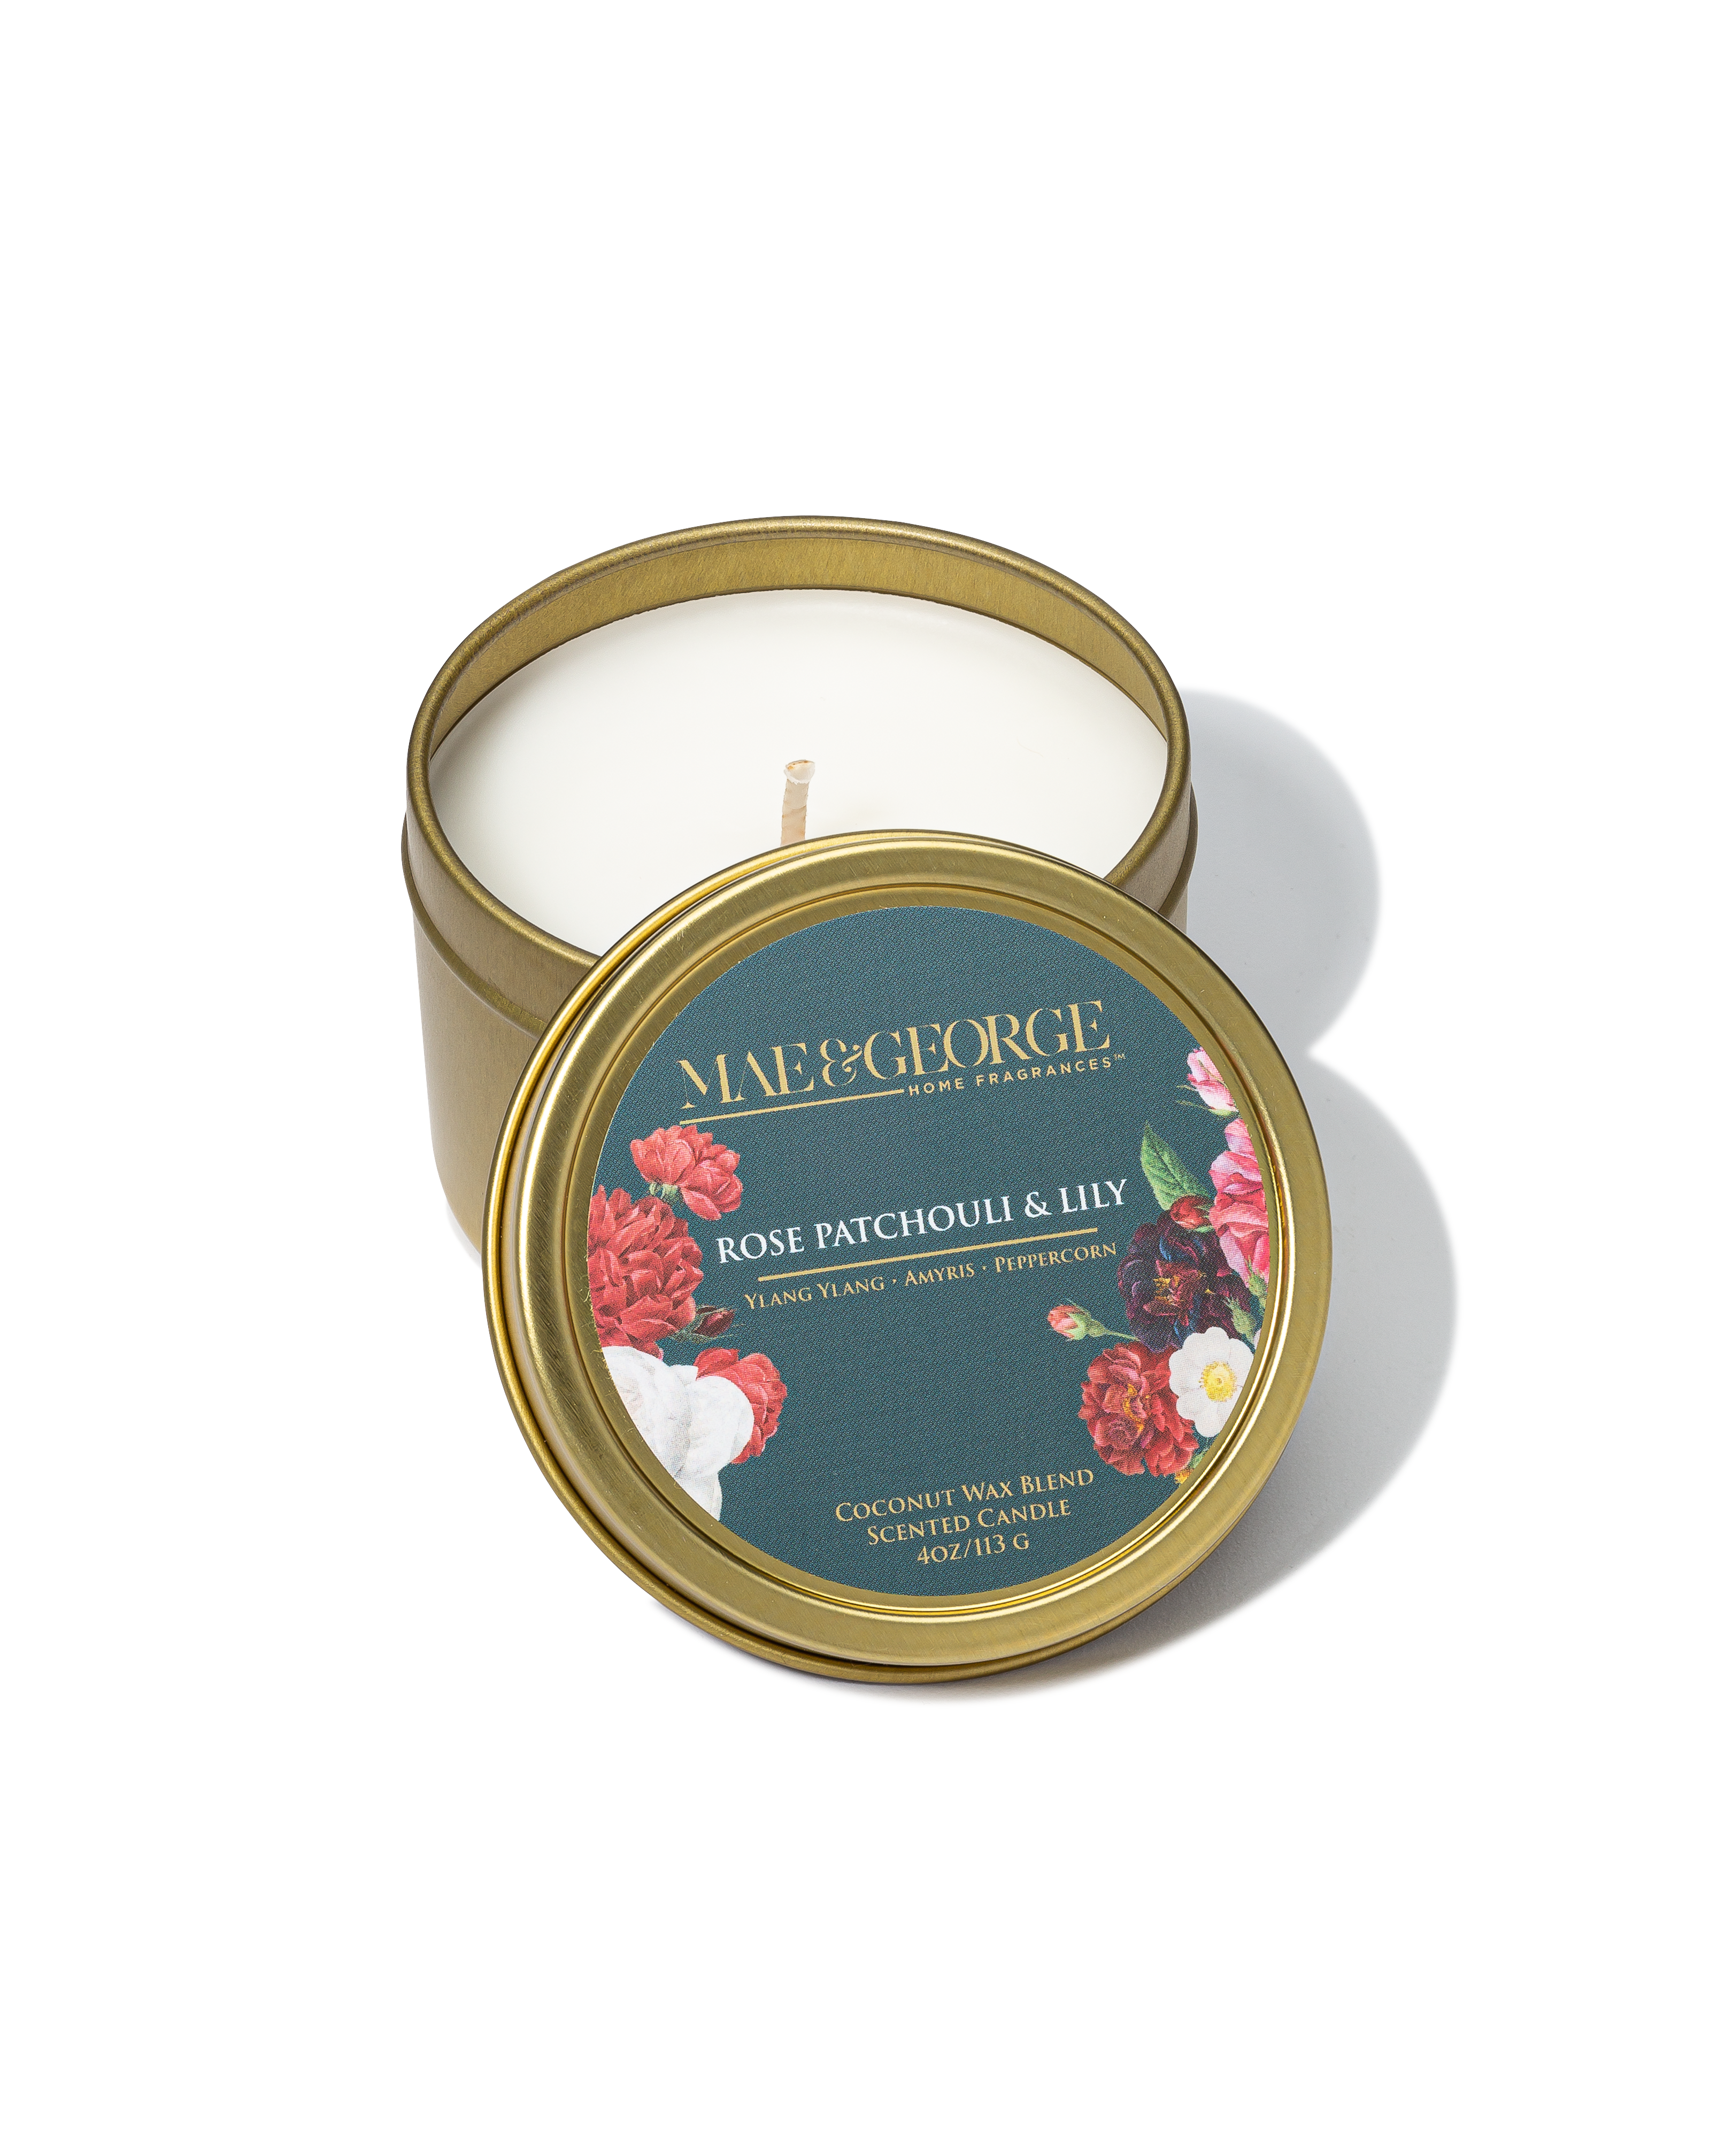 Rose Patchouli & Lily Travel Candle